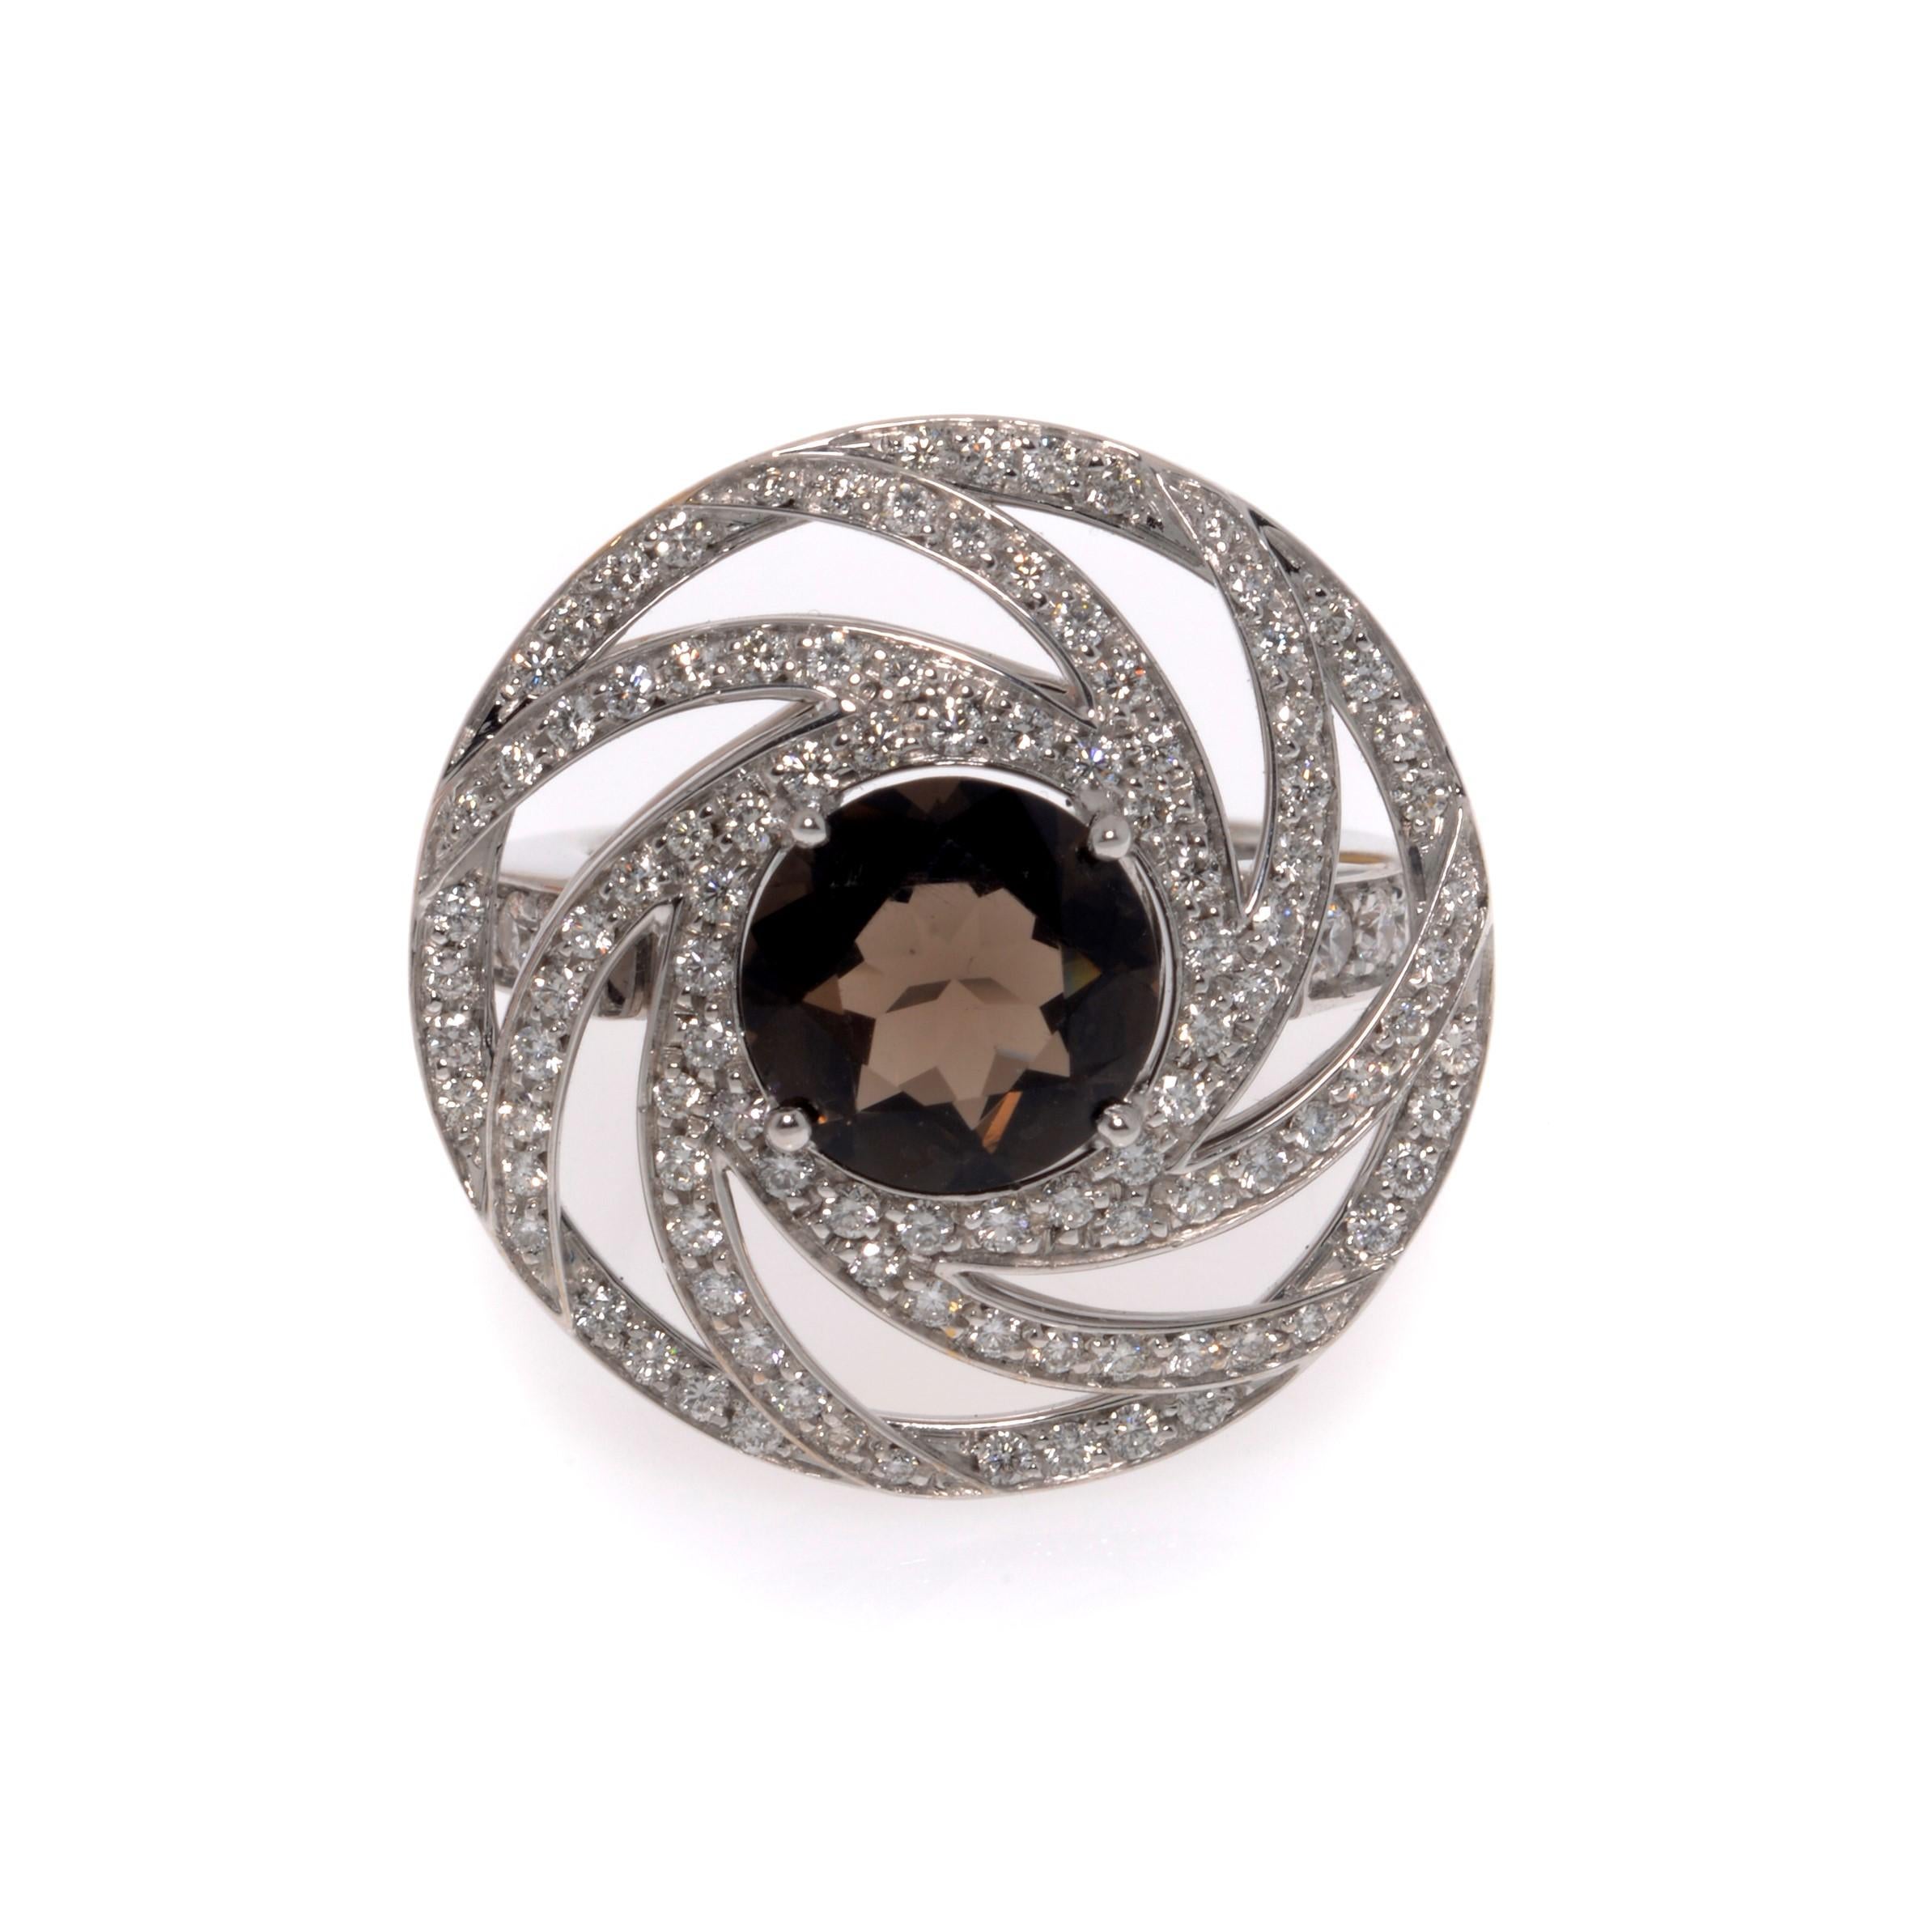 Luca Carati smoky quartz & diamond cocktail ring crafted in 18k white gold. Creating a look that's undeniably glamorous. It features a prong set round cut smoky quartz weighing: 0.50ct. with pave set round cut diamonds weighing 1.18cts. Diamond